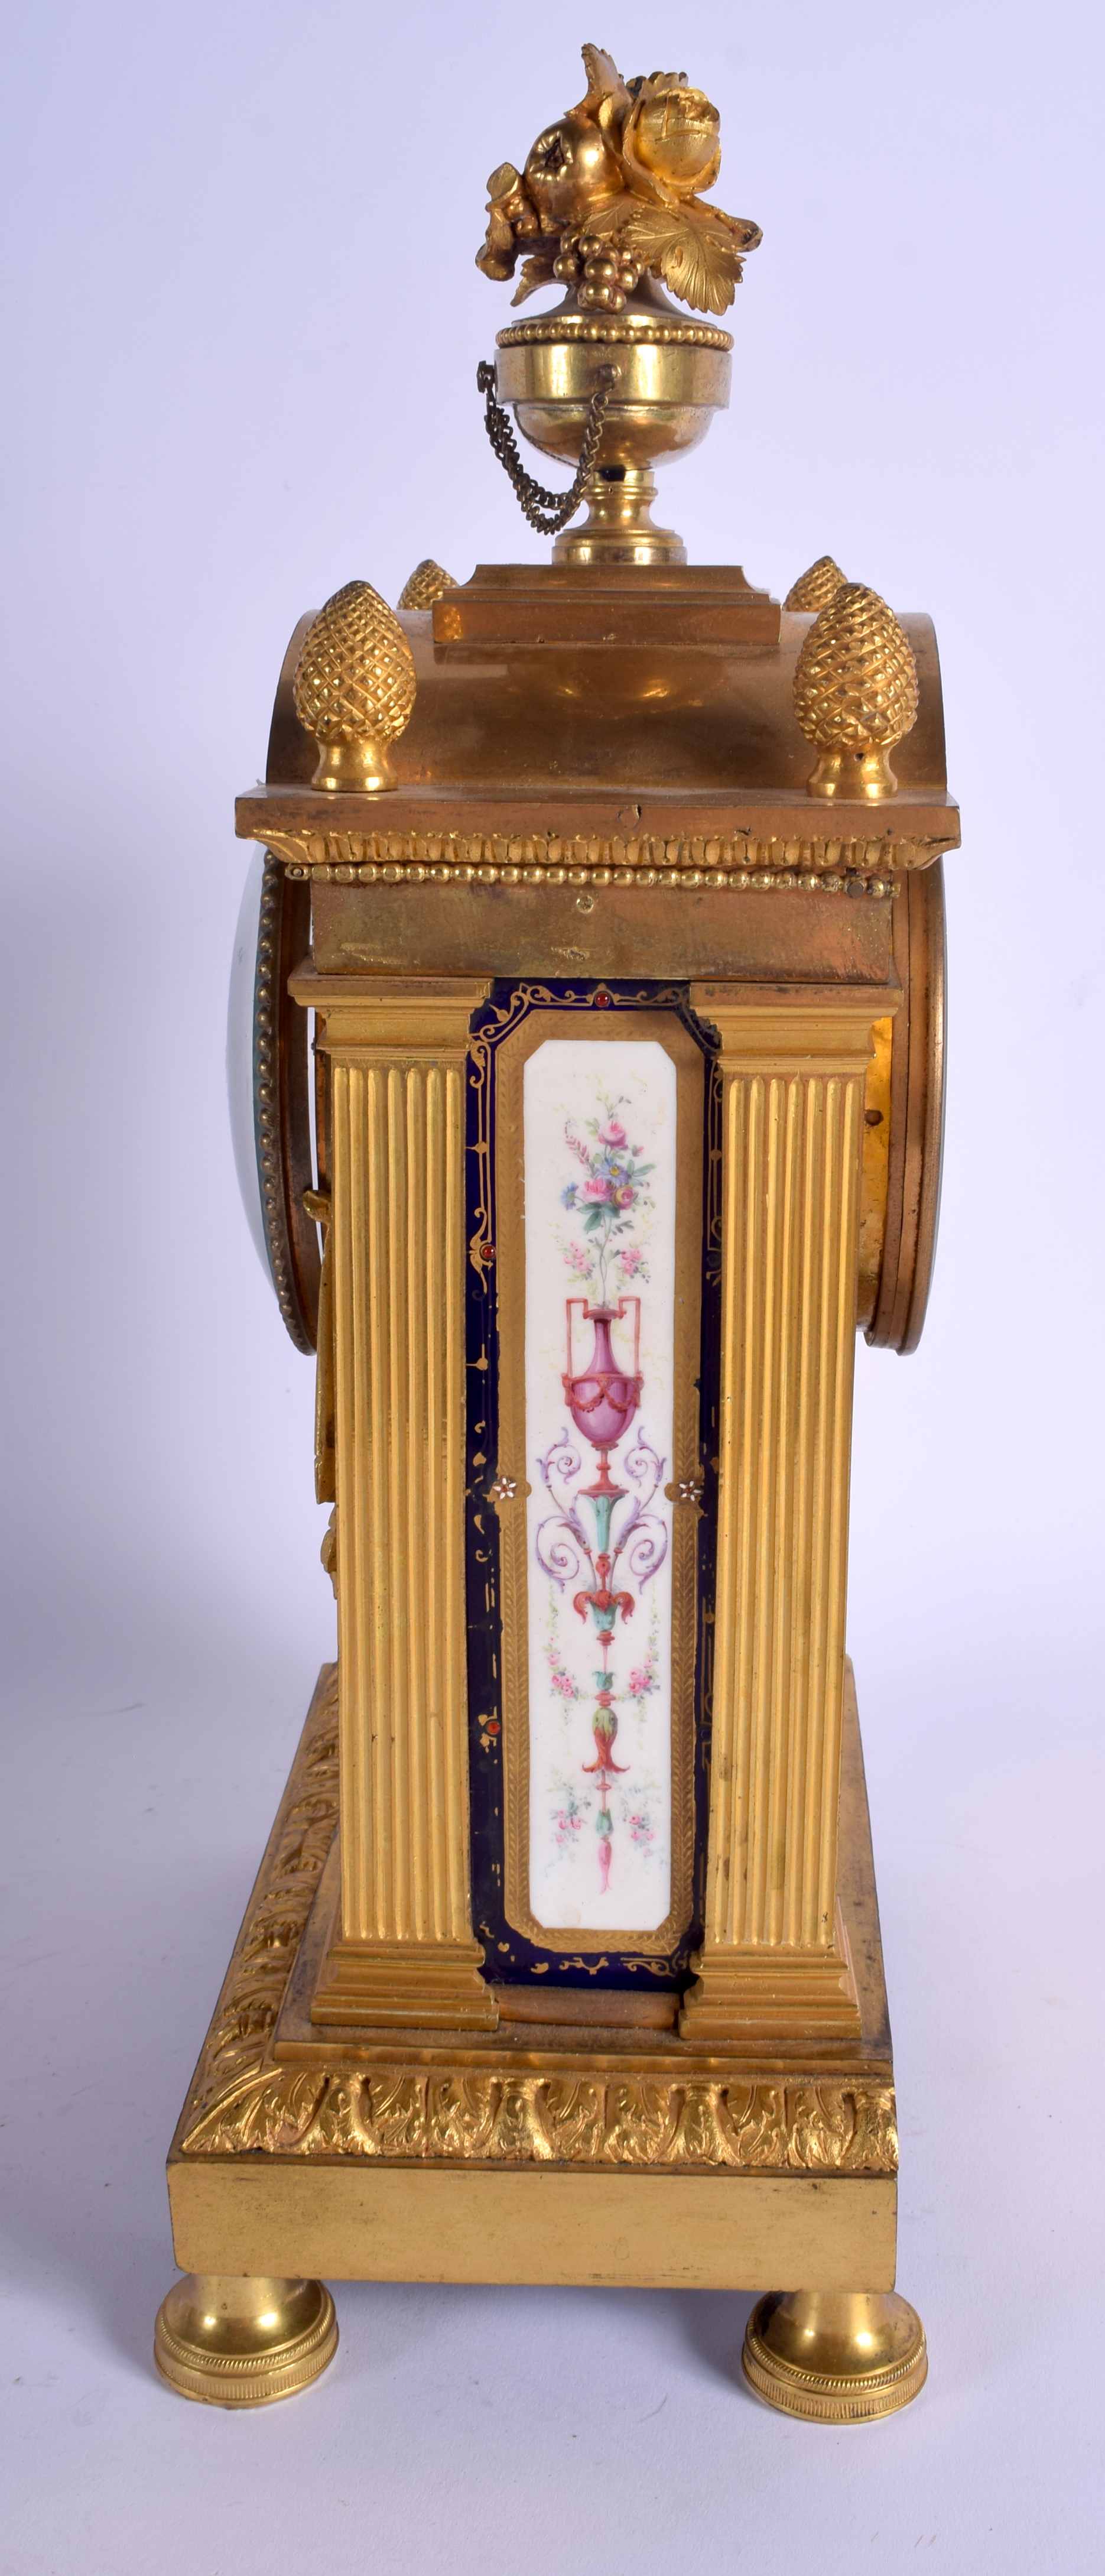 A LARGE 19TH CENTURY FRENCH SEVRES PORCELAIN AND ORMOLU MANTEL CLOCK painted with figures. 39 cm x 1 - Image 2 of 4